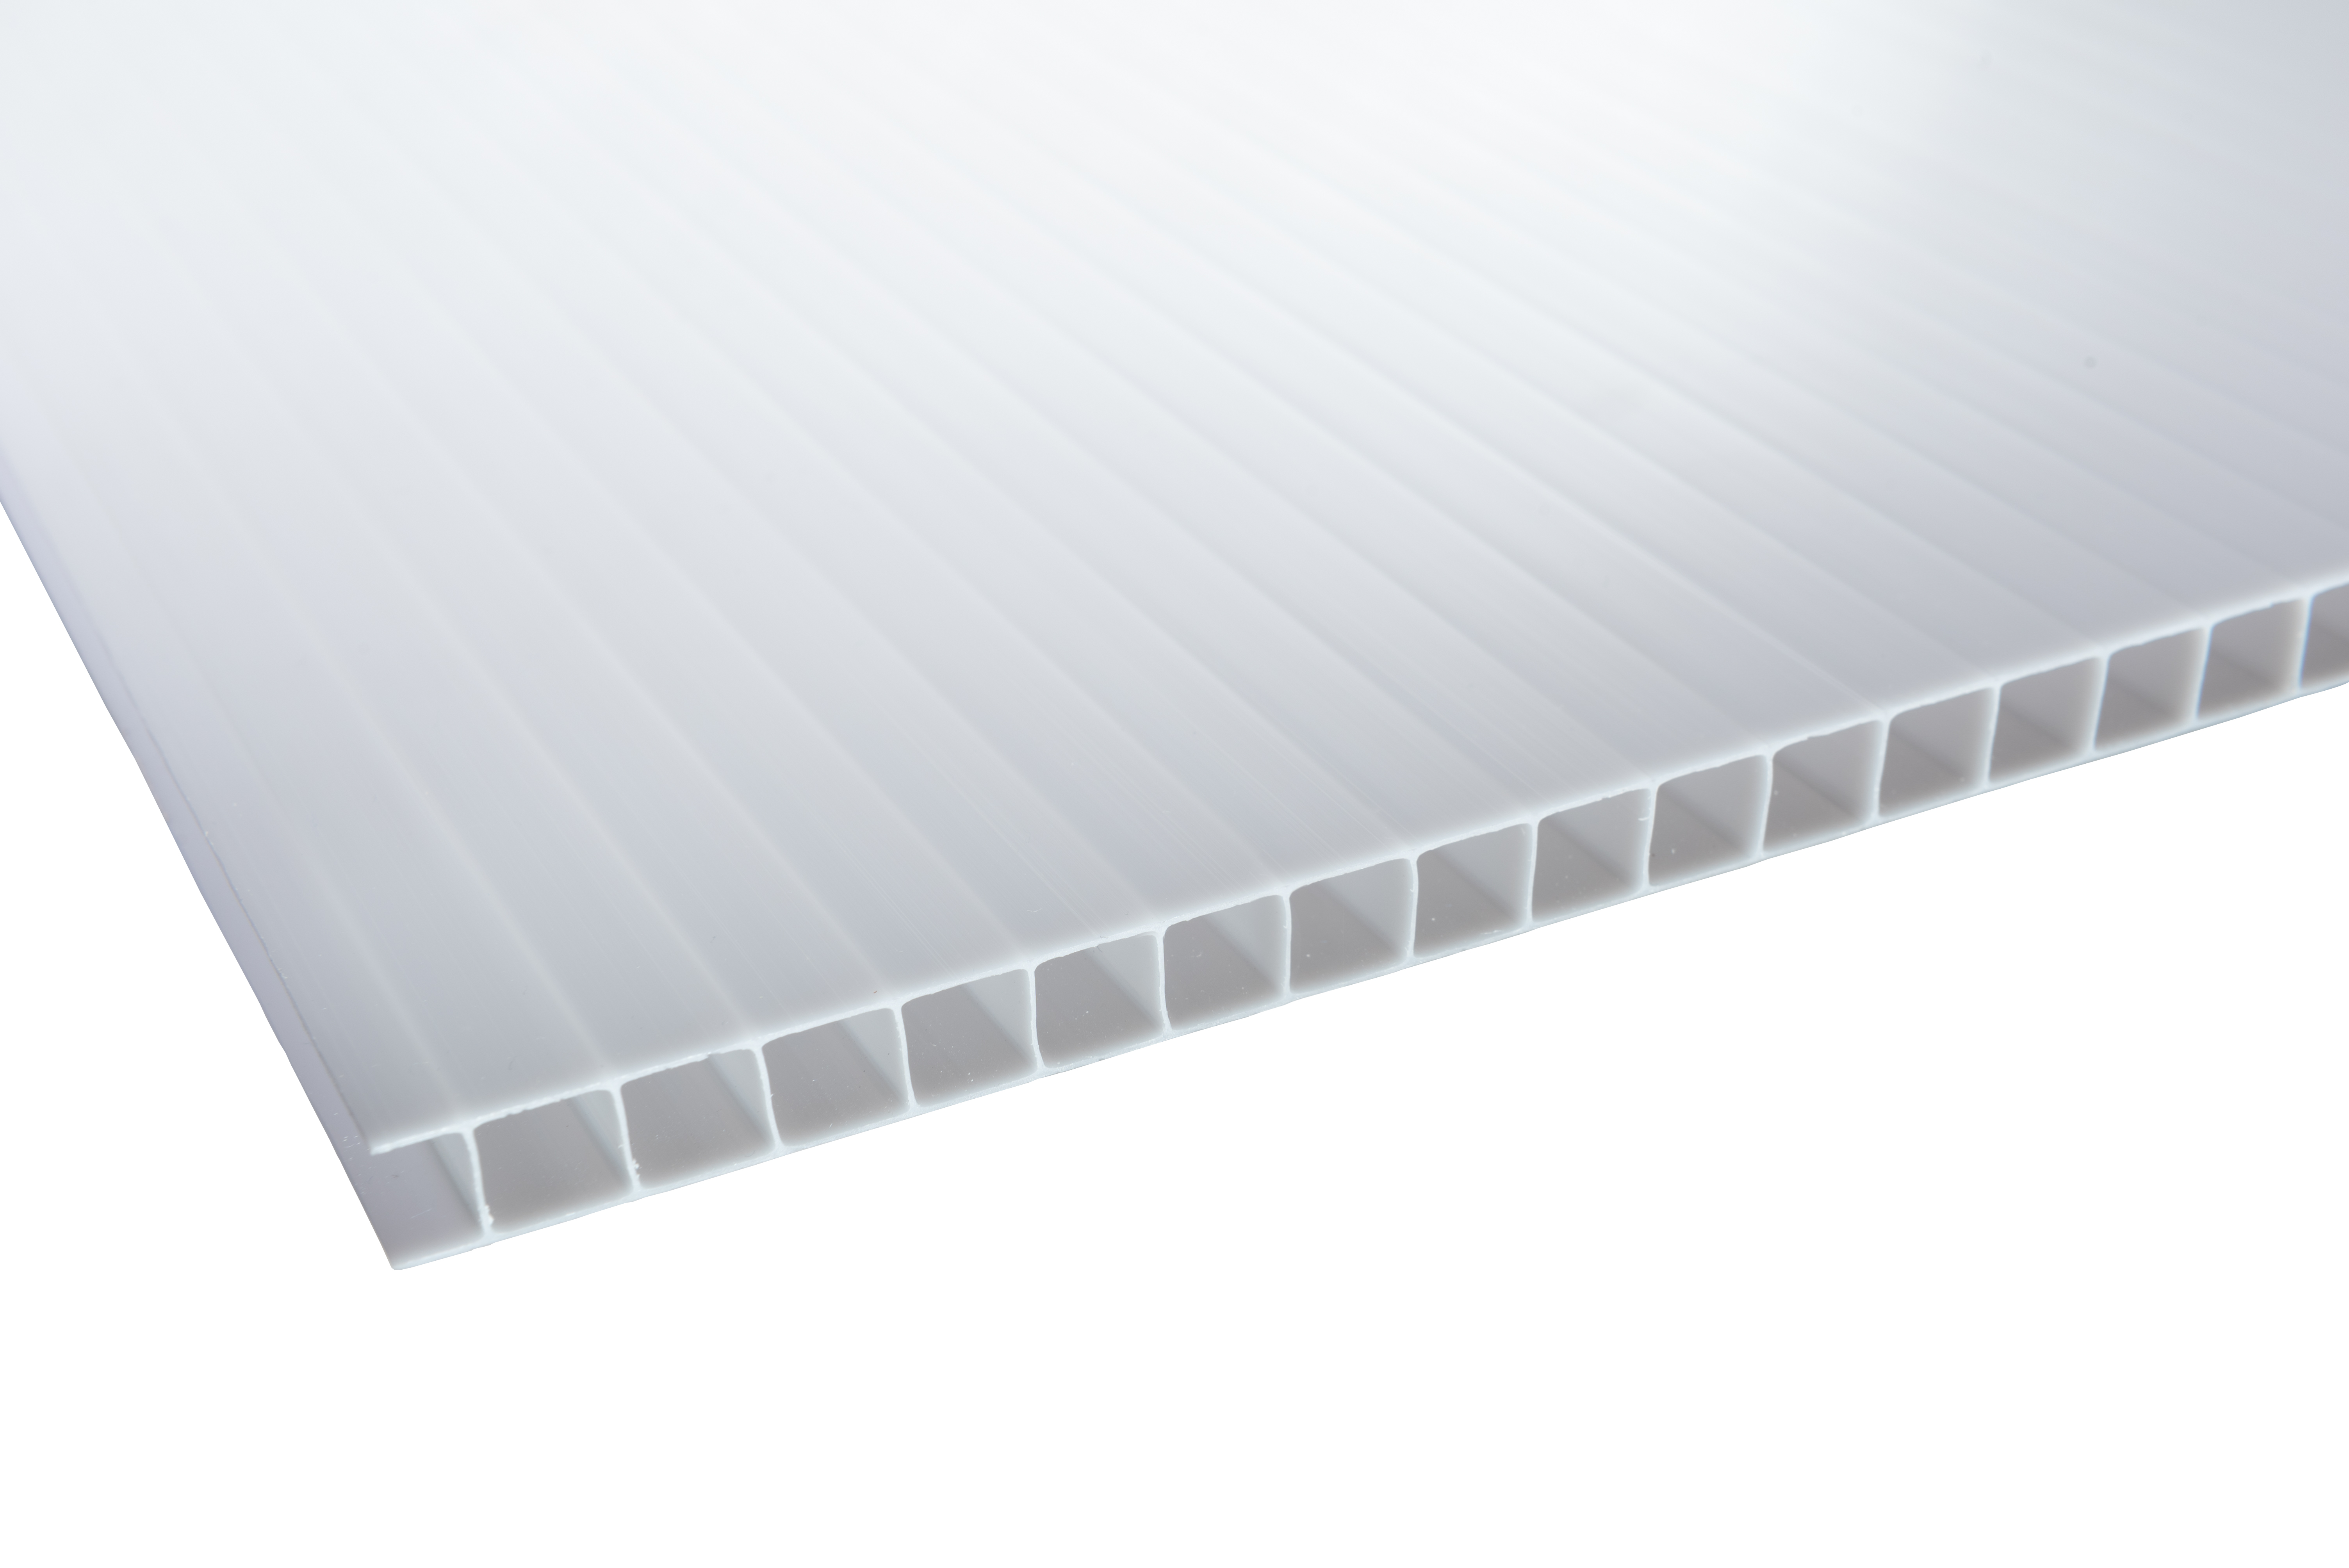 Image of 10mm Opal Multiwall Polycarbonate Sheet - 4000 x 700mm